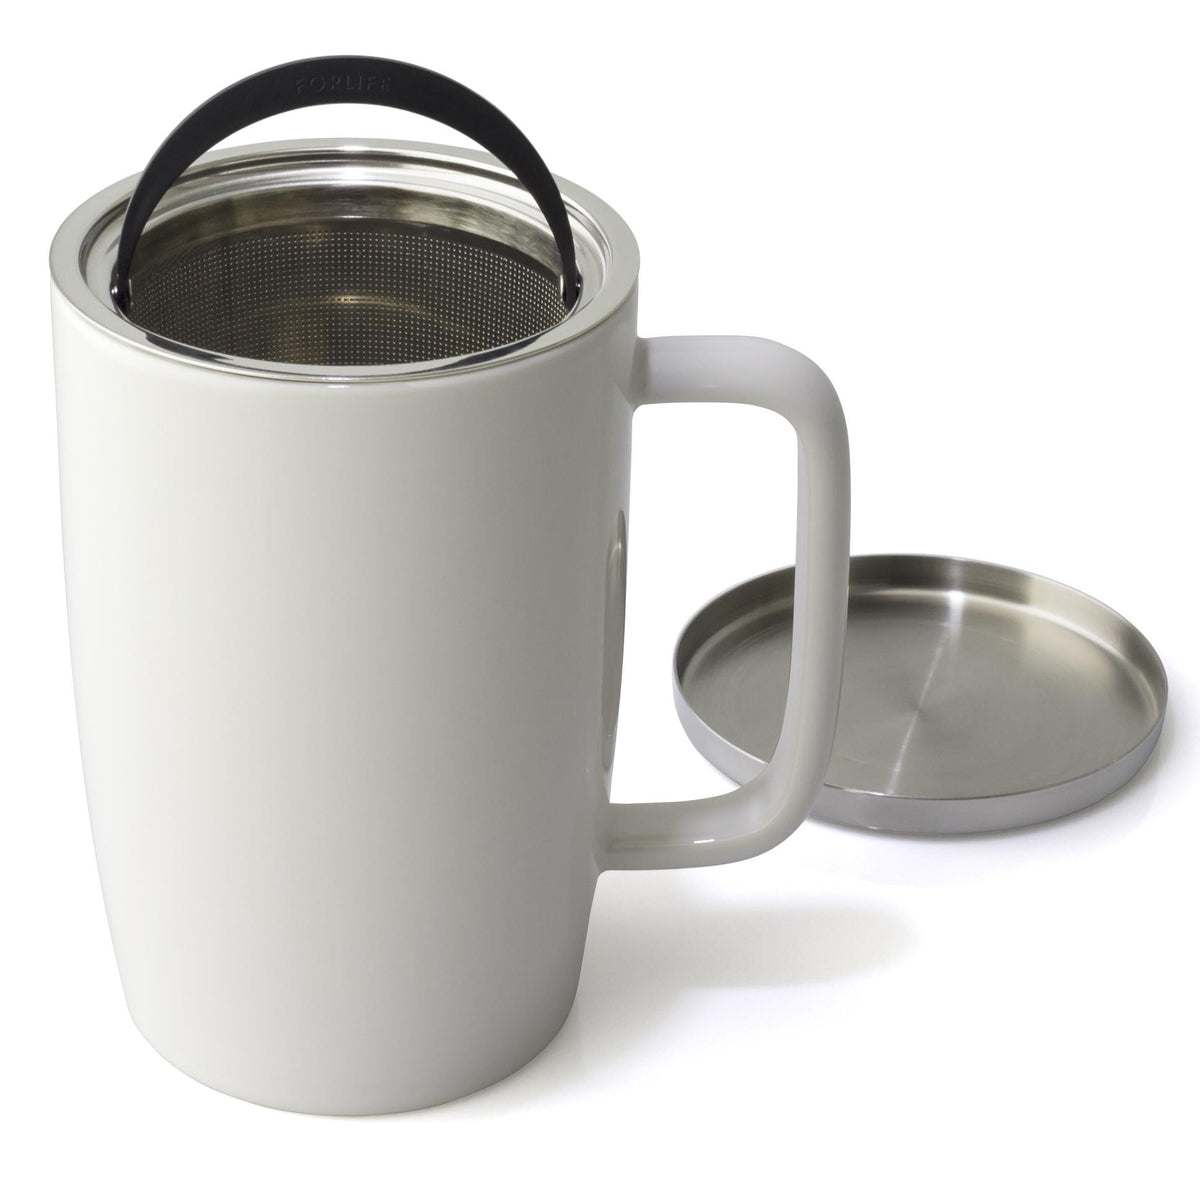 FORLIFE Mug With Basket Infuser and Stainless Steel Lid : Glossy Turquoise